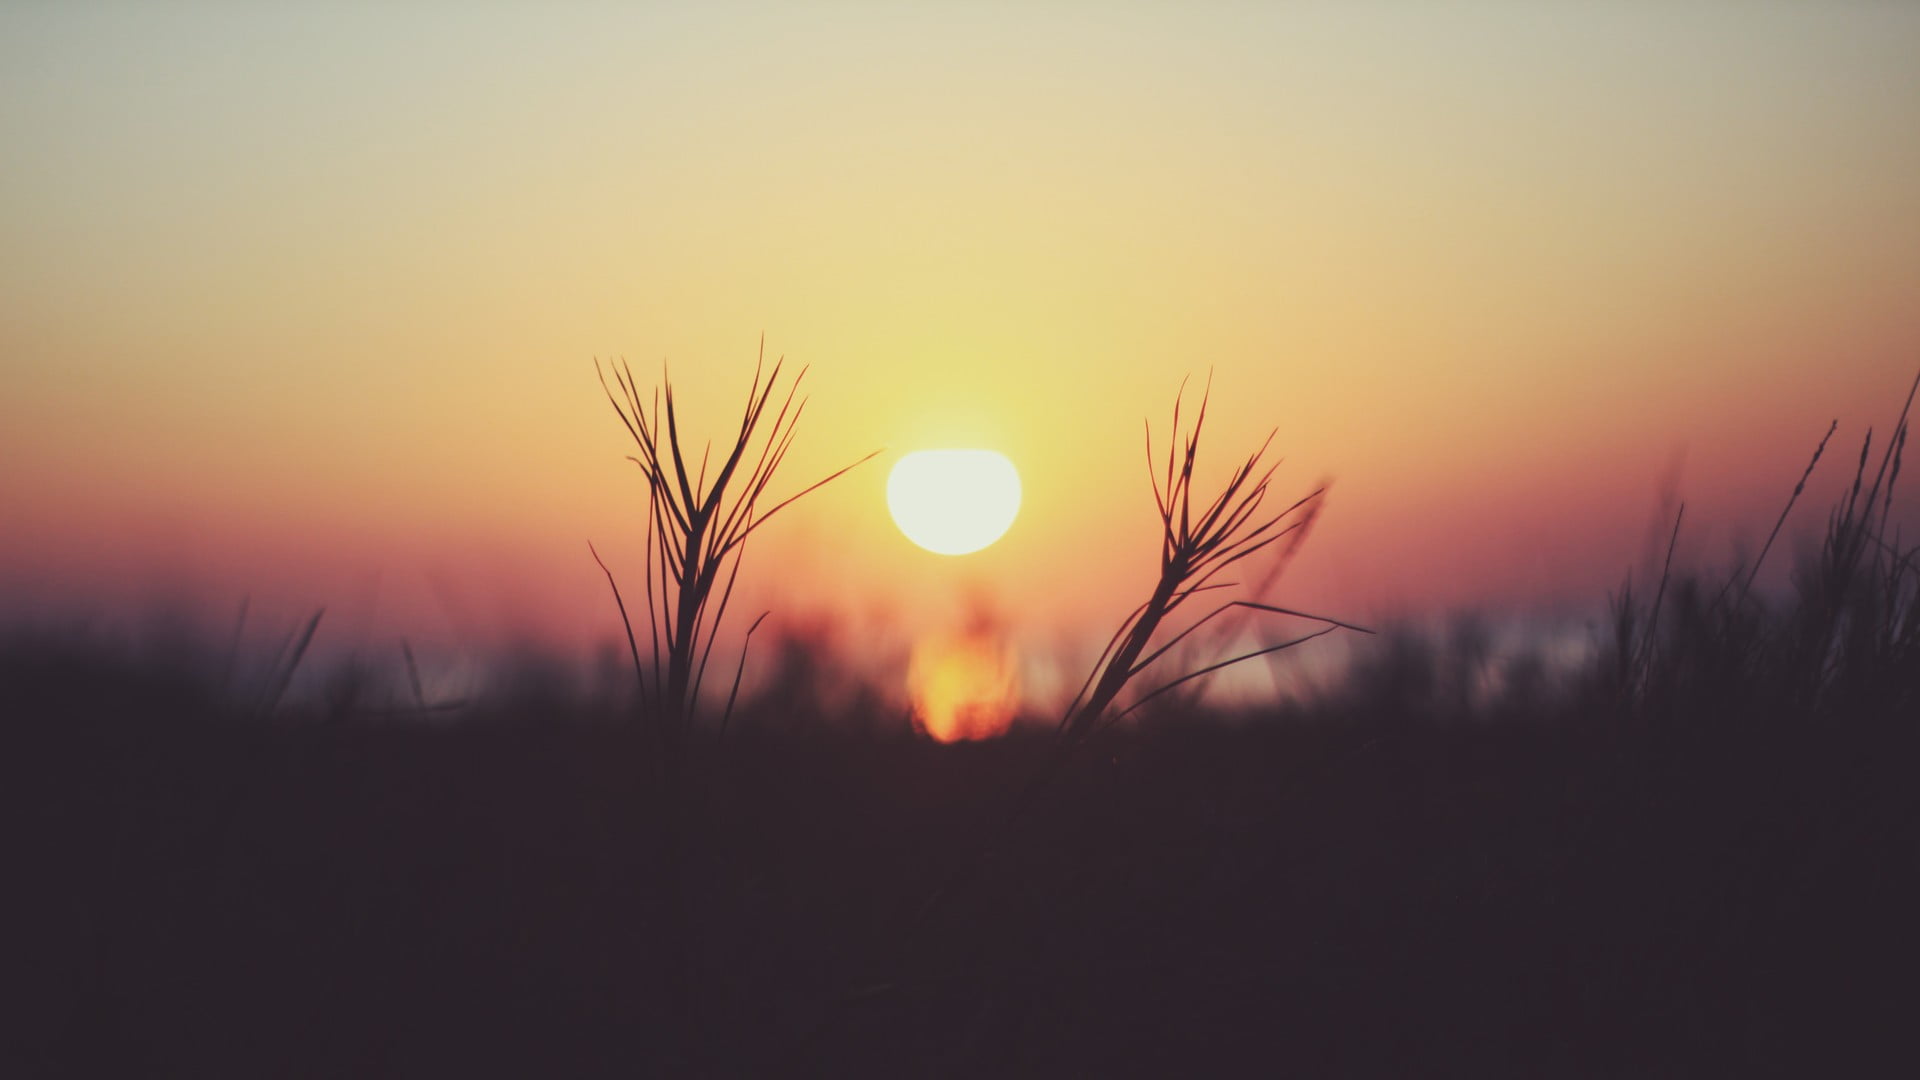 grass silhouette, sunset over silhouette of flowersr, nature